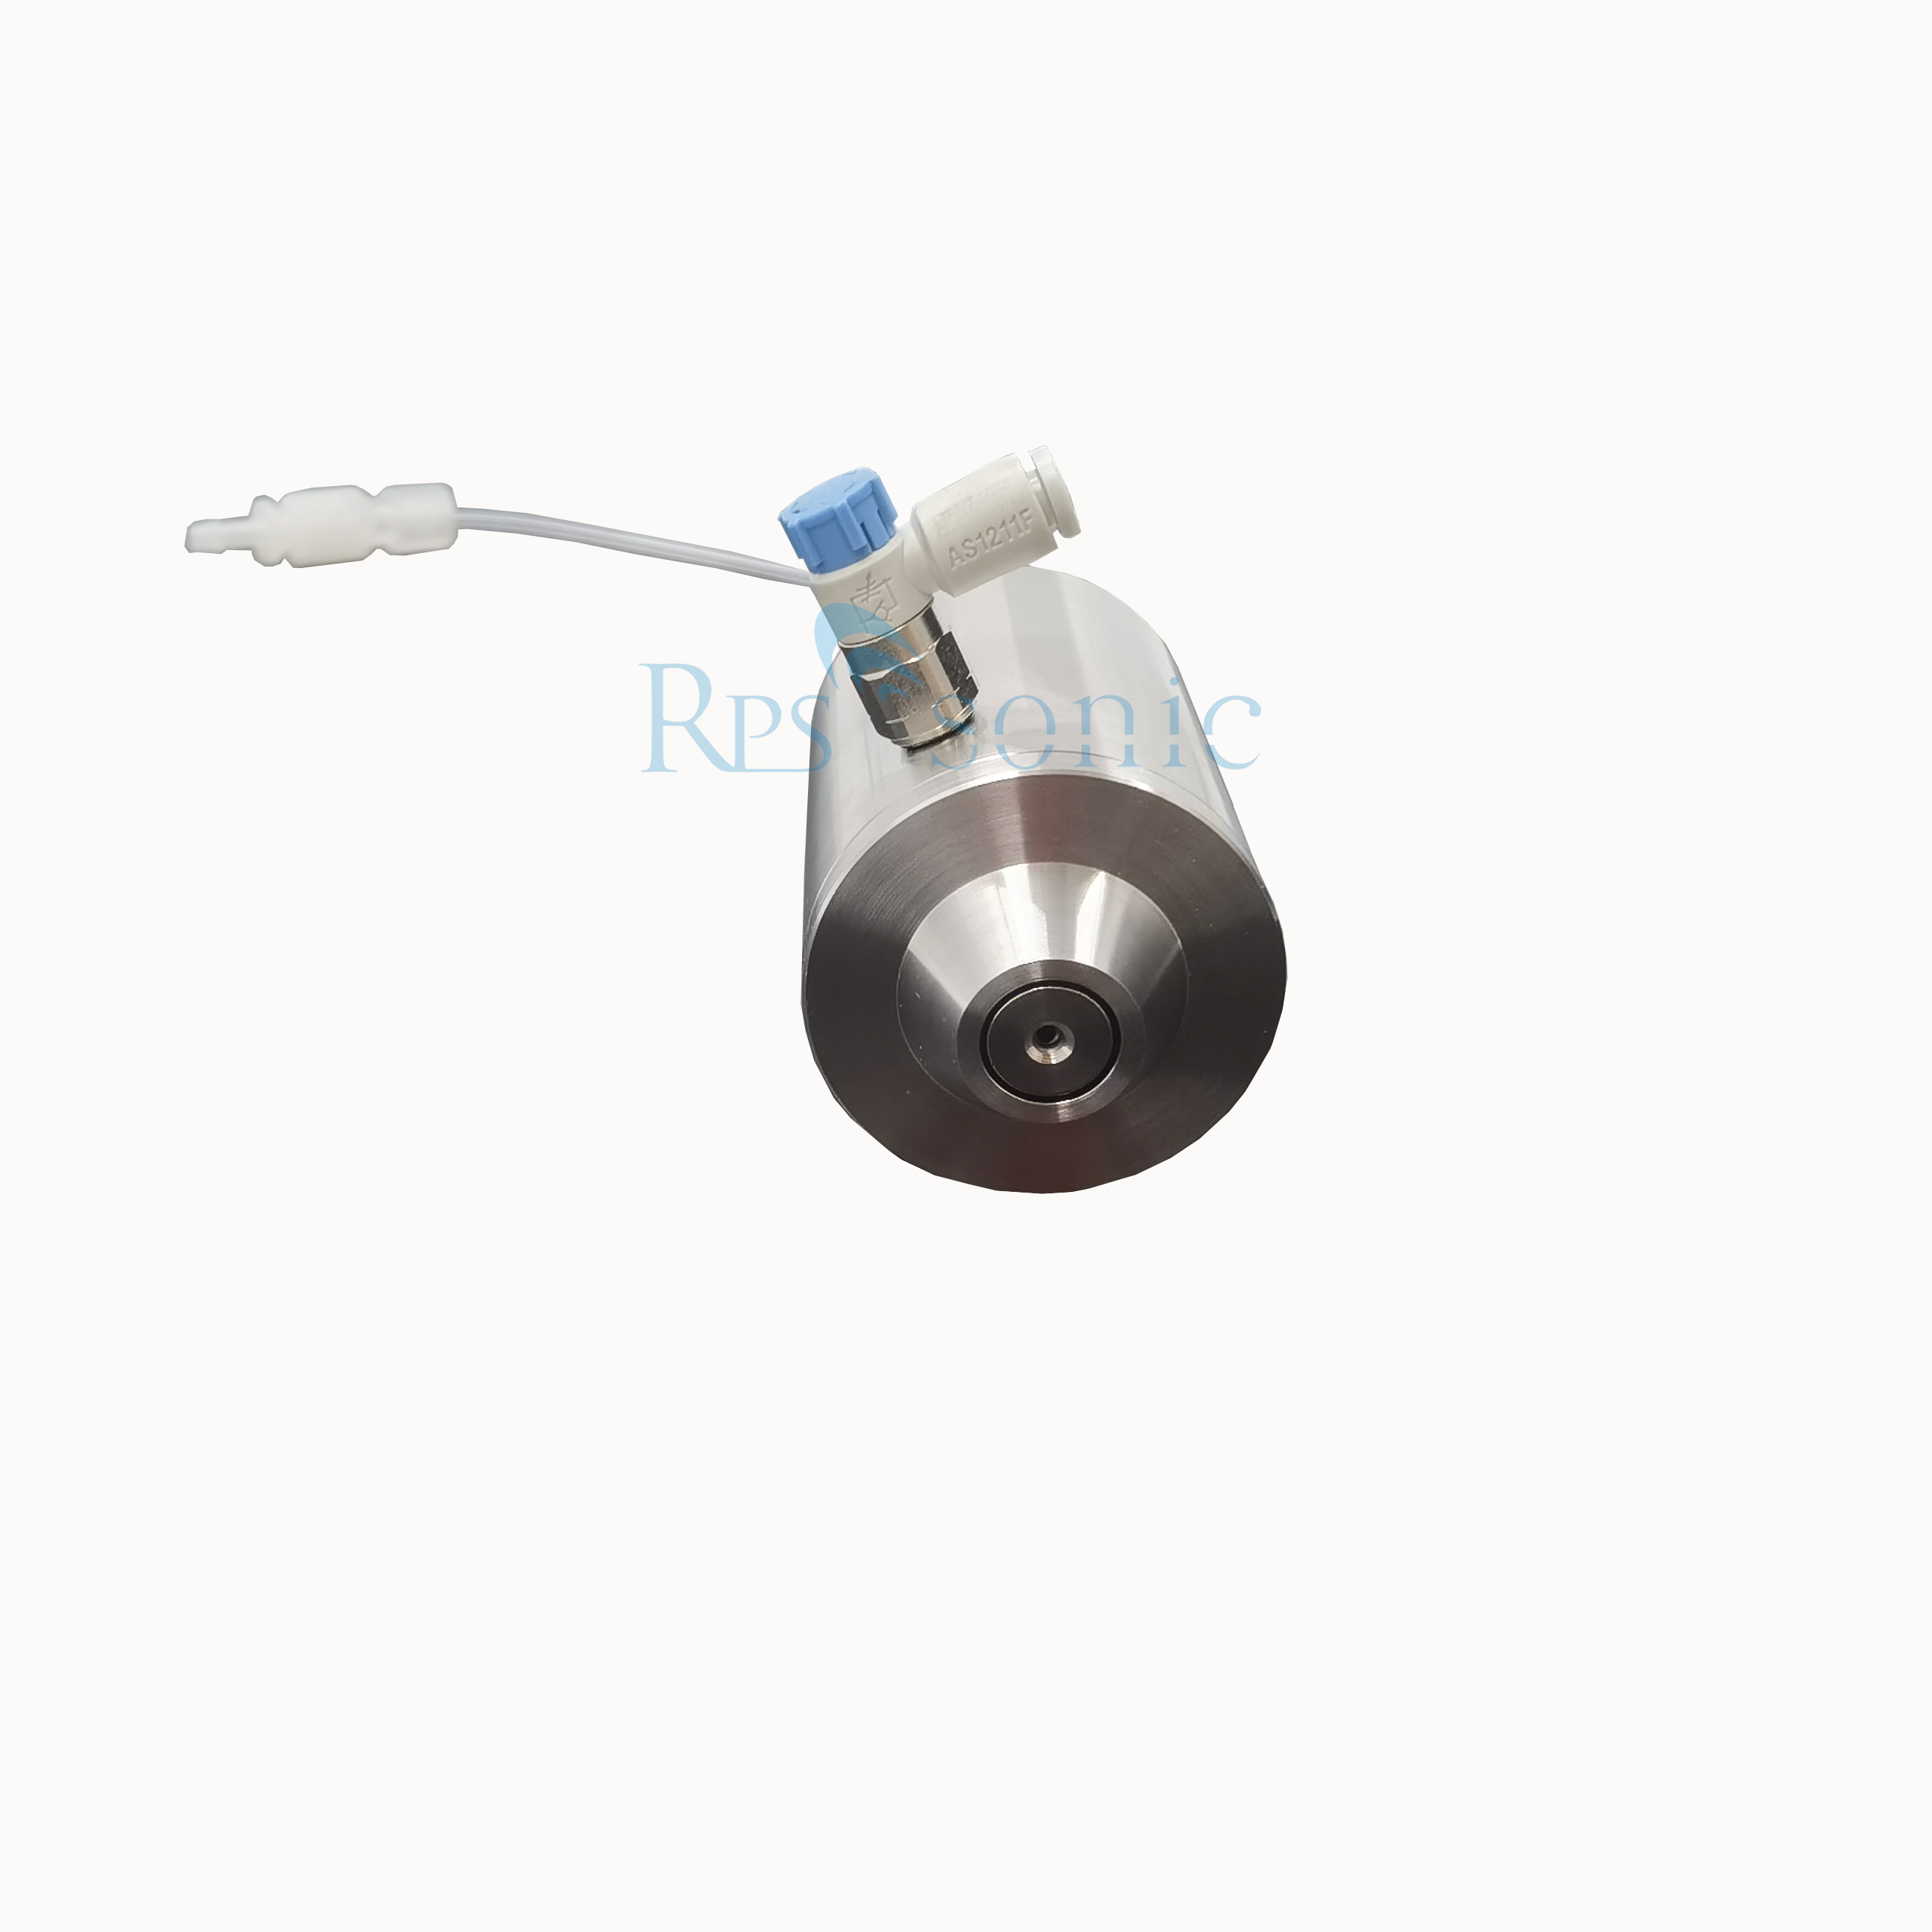 50Khz Titanium Cone Ultrasonic Spray Nozzles For Photoresists Wafer Coatings